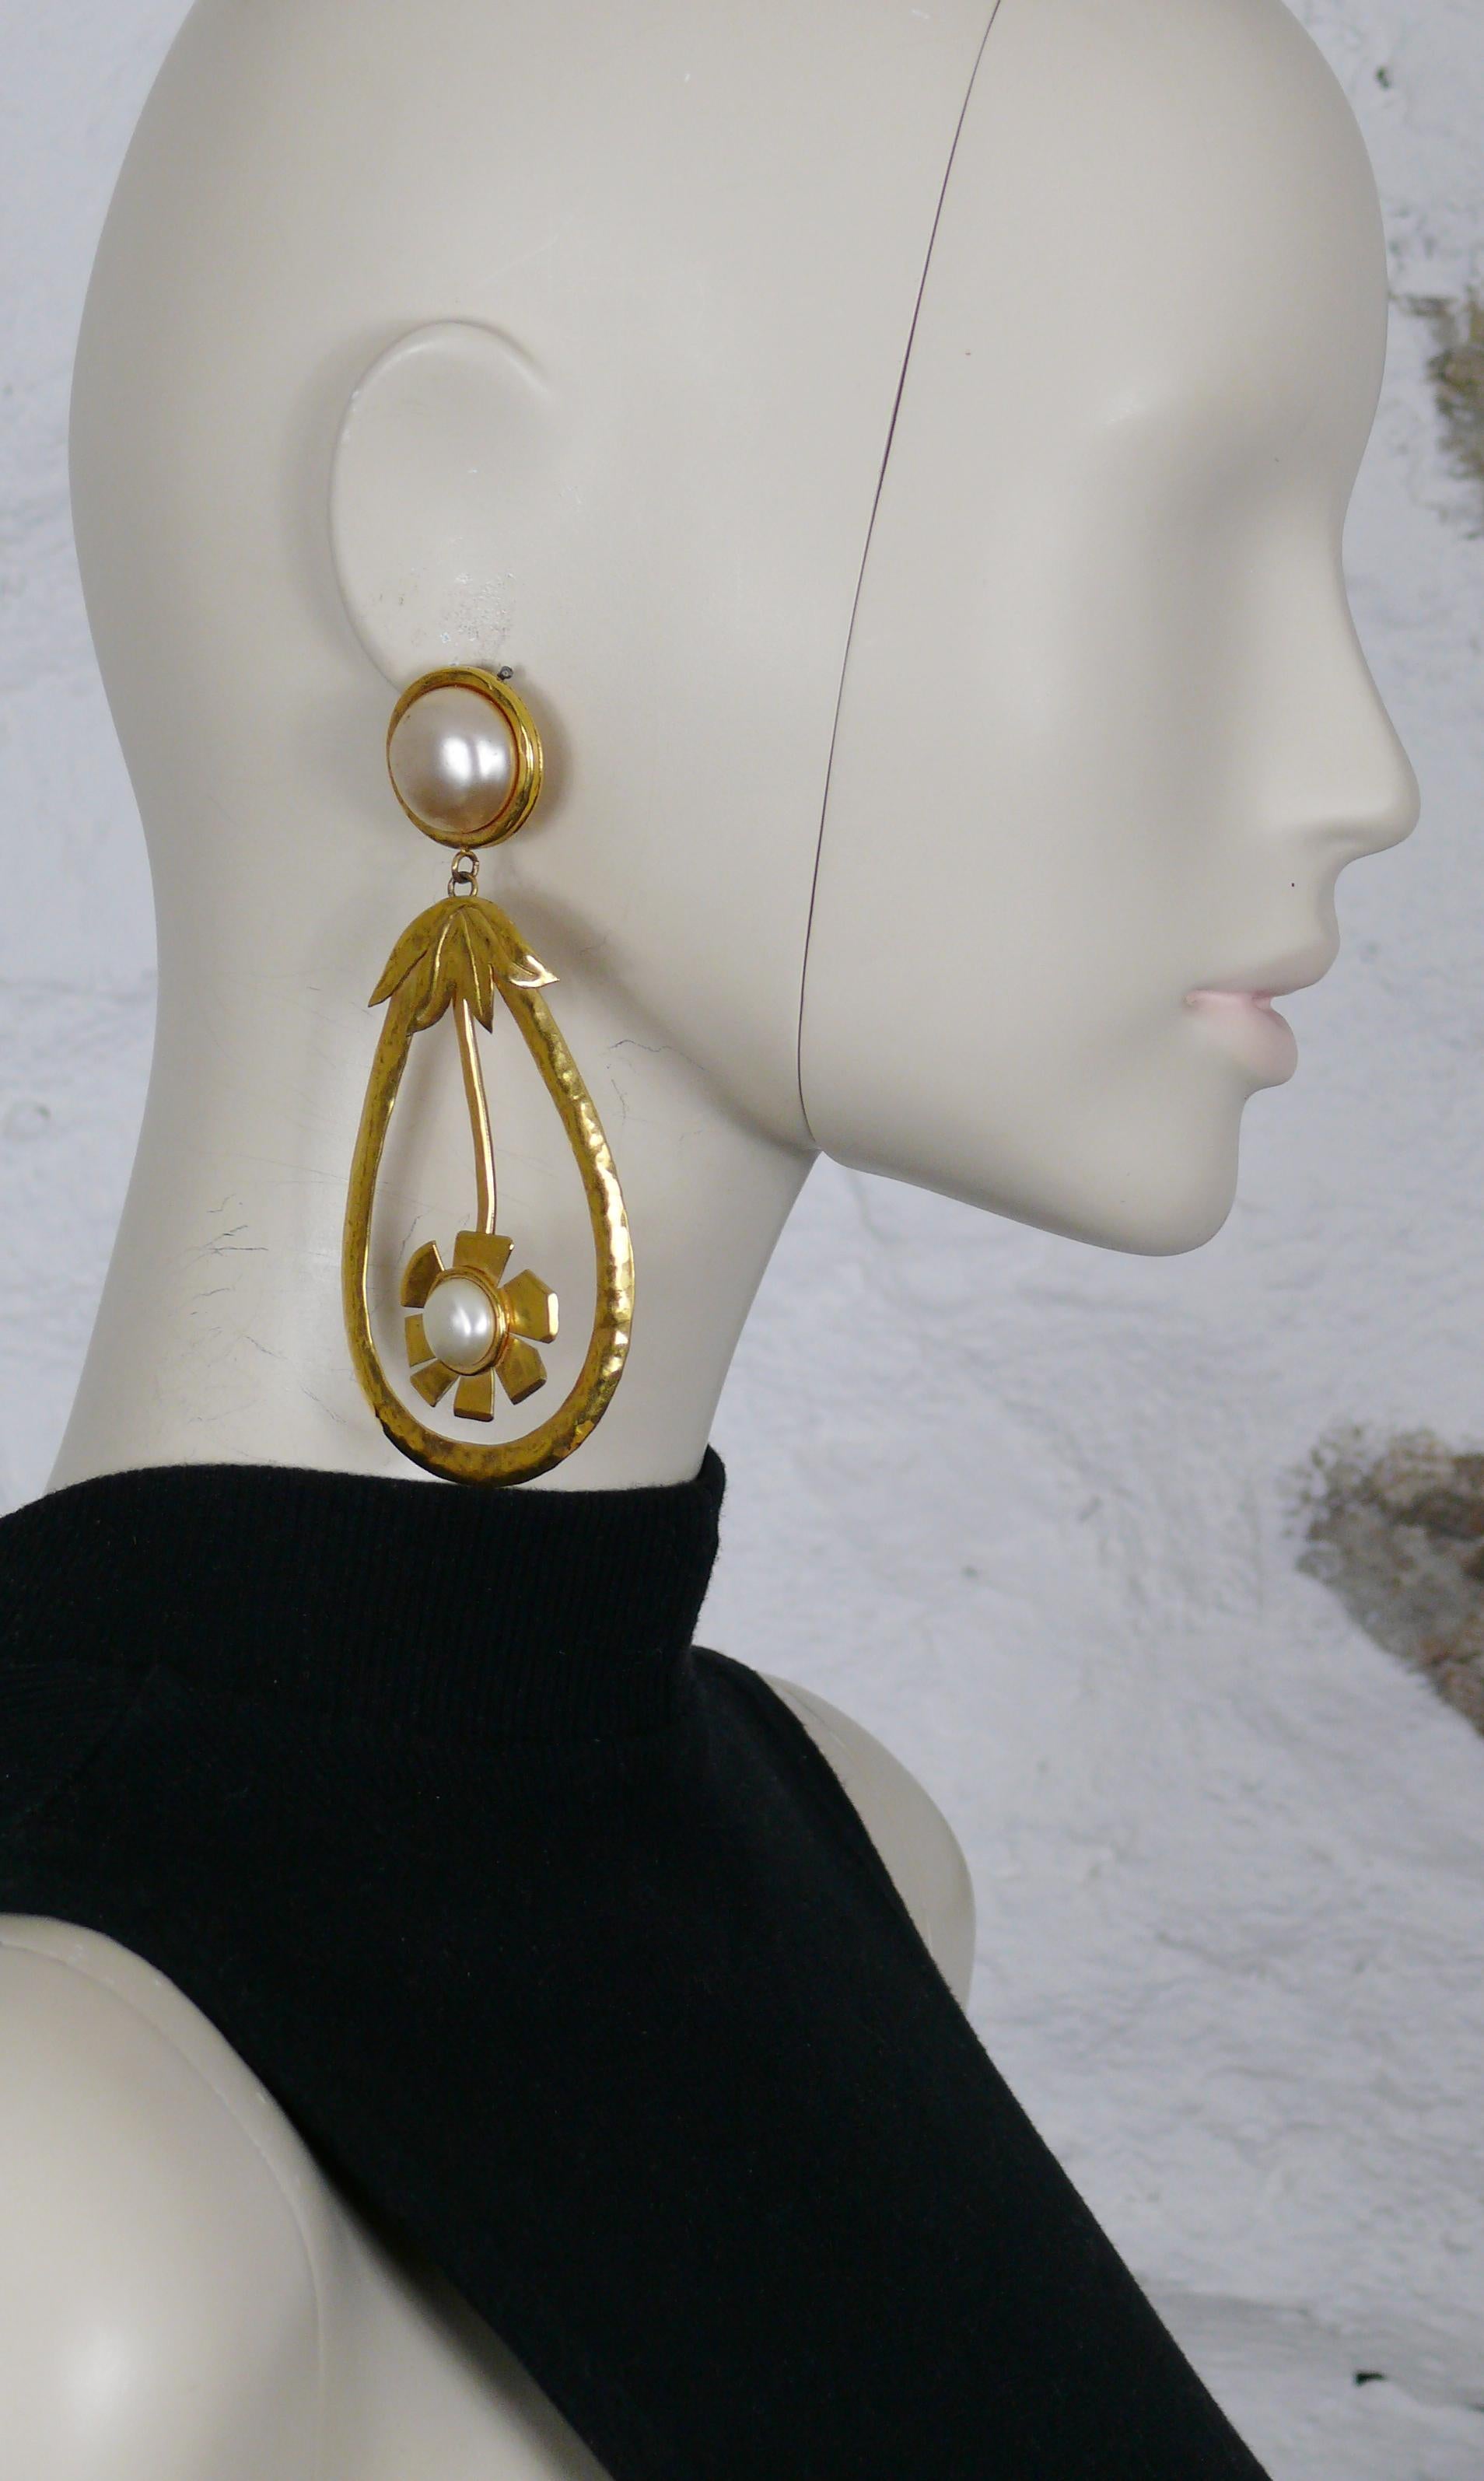 CHRISTIAN LACROIX vintage oversized gold toned stylized flower dangling earrings embellished with faux pearls.

Embossed CHRISTIAN LACROIX CL Made in France.

Indicative measurements : length approx. 11 cm (4.33 inches) / max. width approx. 5.2 cm